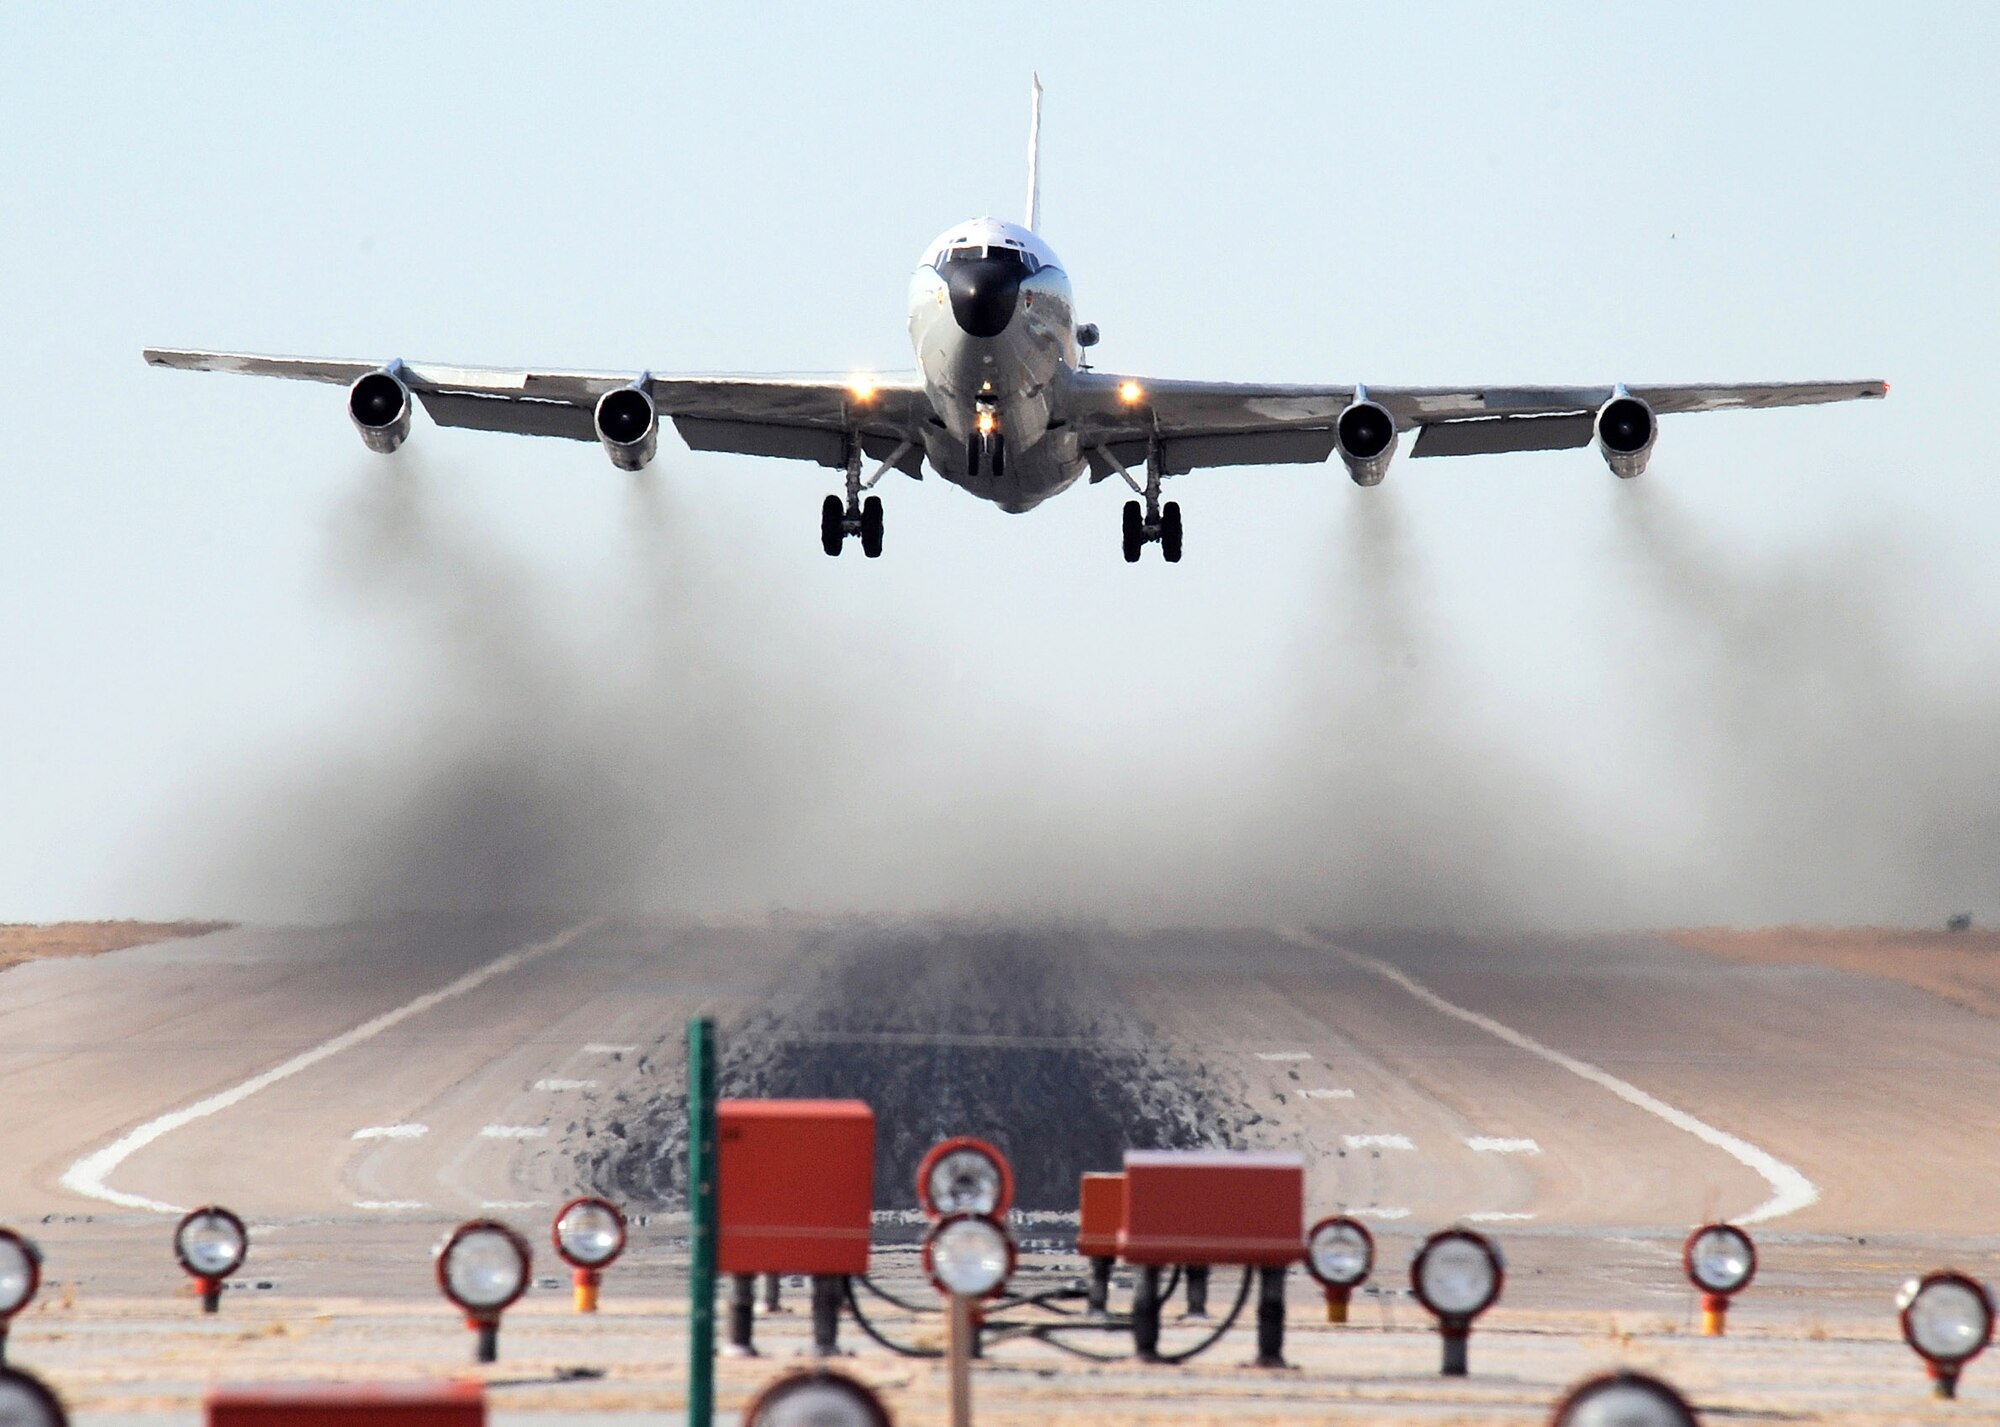 A WC-135 Constant Phoenix aircraft takes off from Offutt Air Force Base, Neb.  The aircraft collects air samples from areas around the world using an on-board atmospheric collection suite.  The collection suite allows the mission crew to detect radioactive “clouds” in real time.  (U.S. Air Force photo/Josh Plueger)